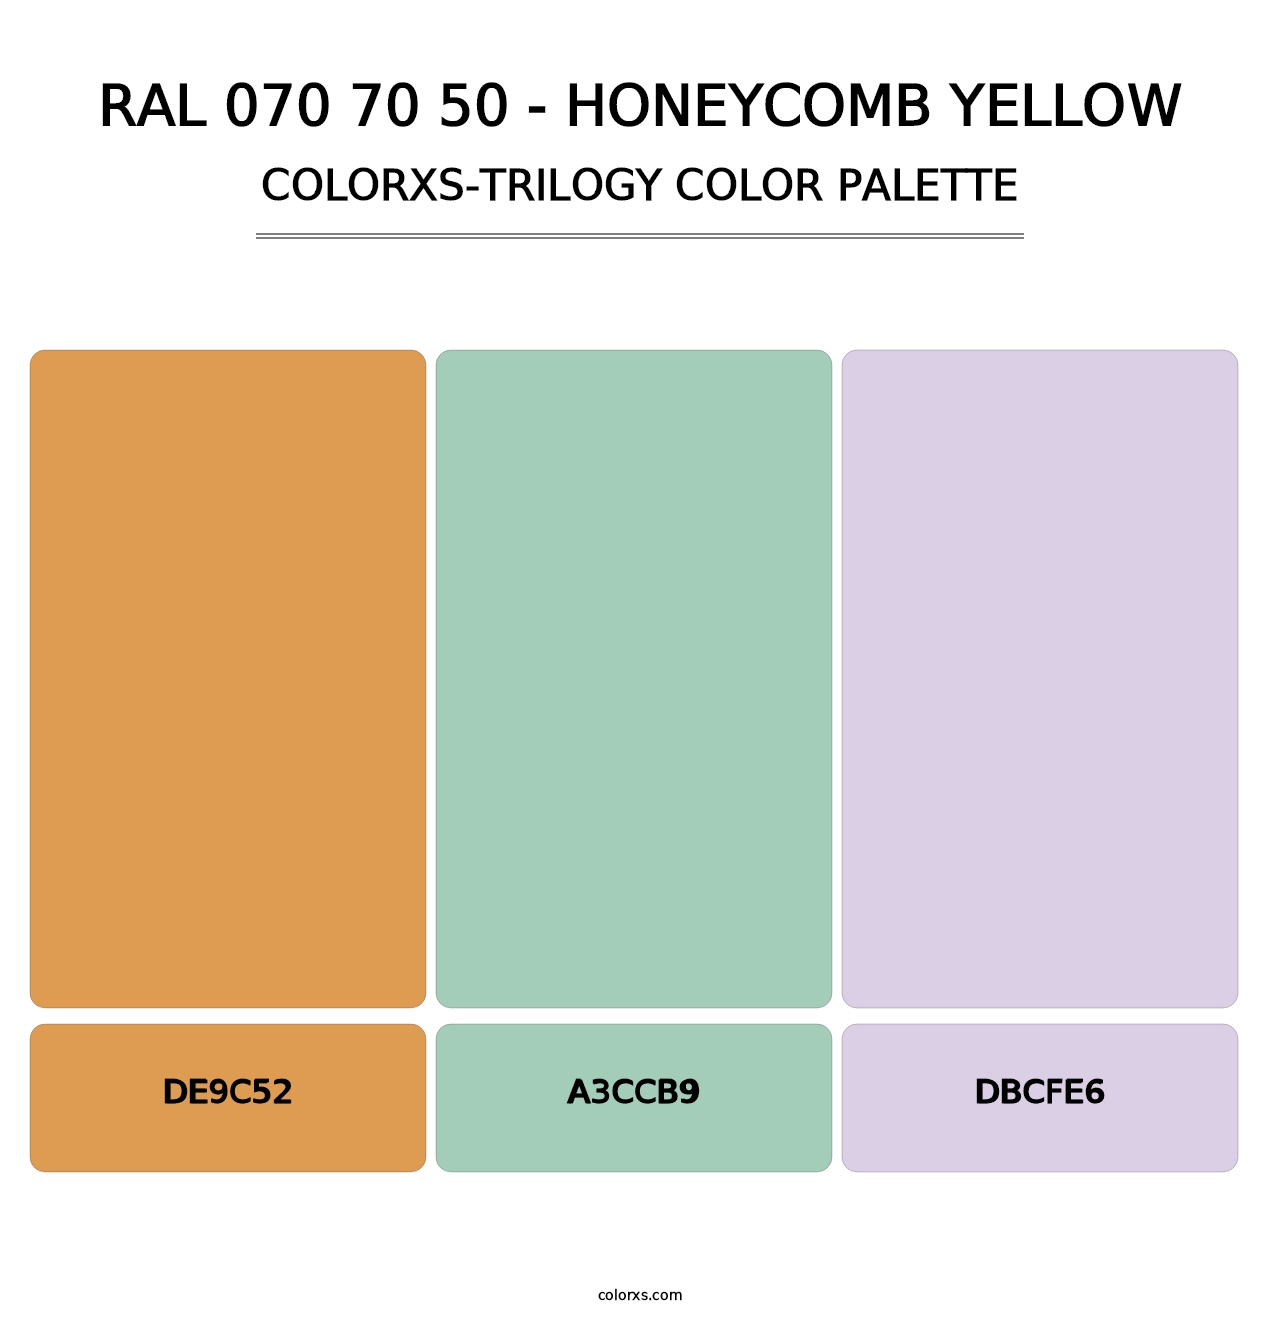 RAL 070 70 50 - Honeycomb Yellow - Colorxs Trilogy Palette